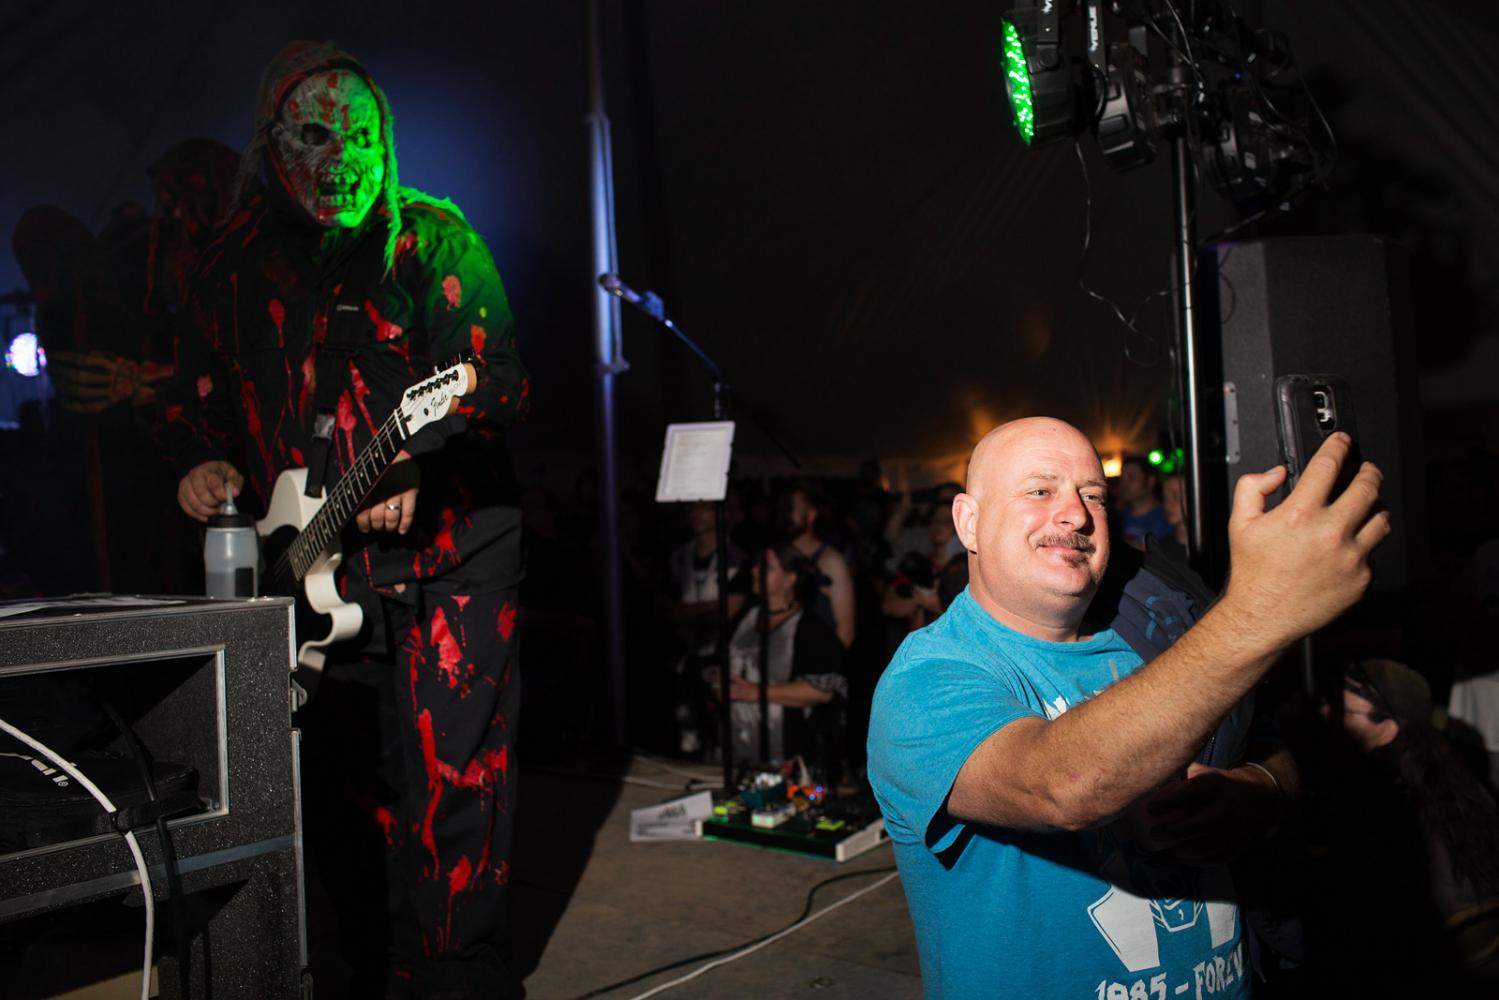 A fan takes a selfie with Christian metal band Grave Robber at Audiofeed Festival in Urbana,...